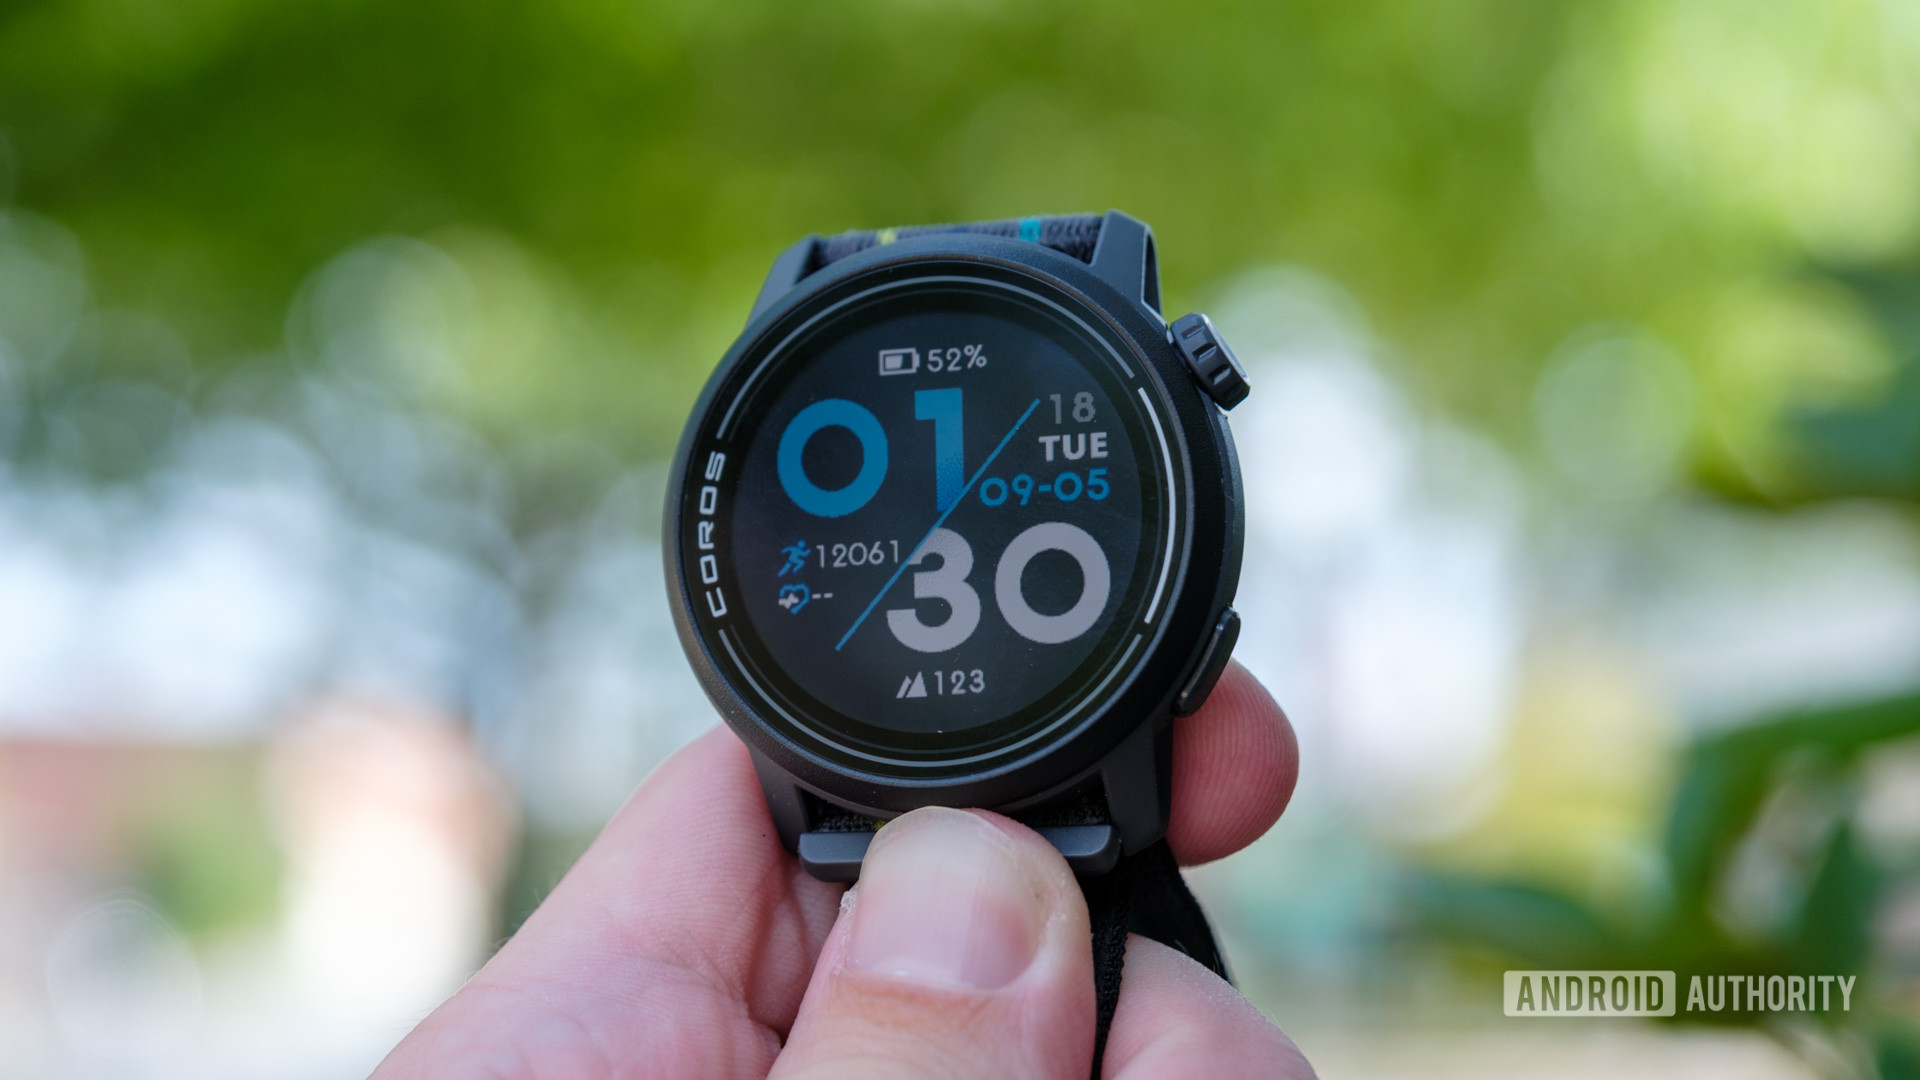 Garmin Forerunner 255 vs. COROS Pace 3: Which Should You Pick?